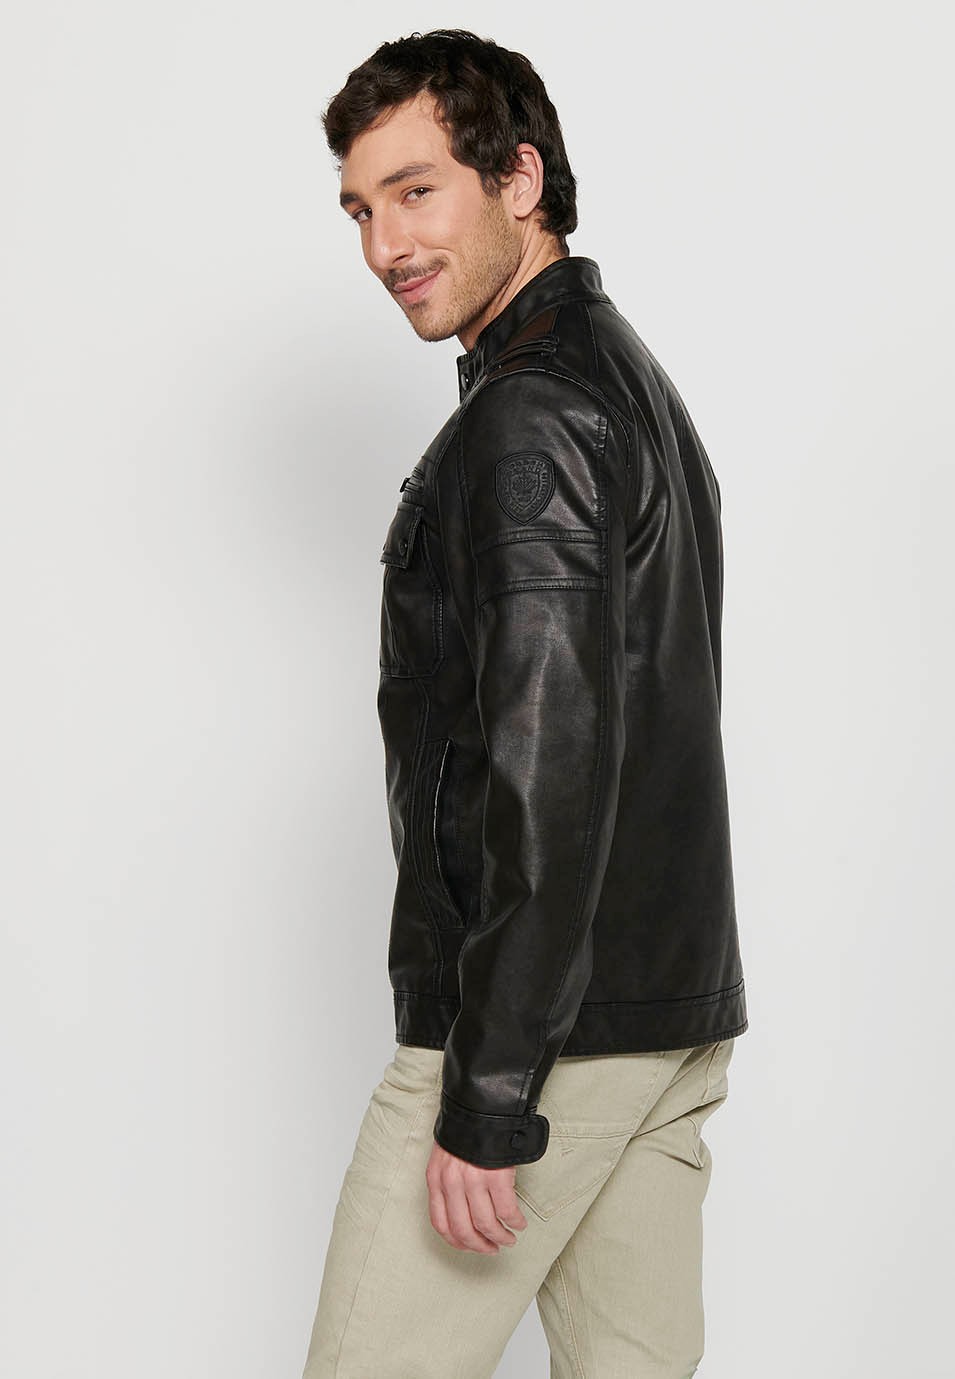 Dark Brown Leather Effect Jacket with Front Zipper Closure and Round Neck for Men 2